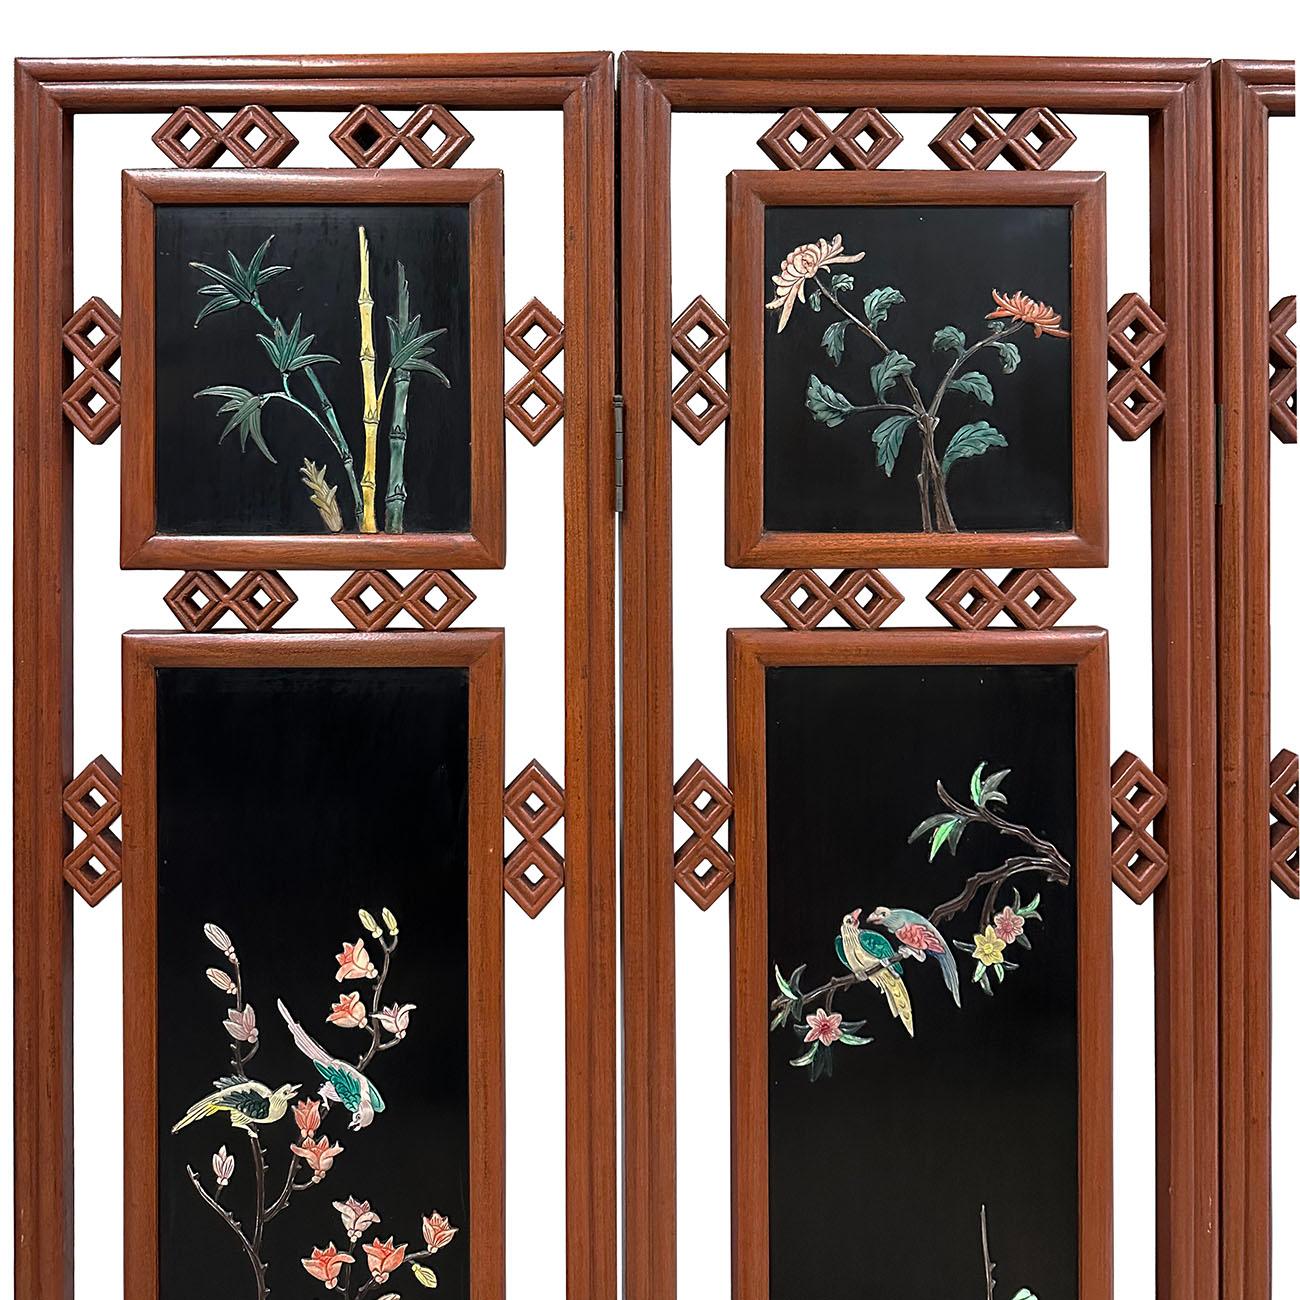 This is a set of 4 panels of Chinese vintage open carved wooden screen which to be used as the room section panels in ancient China that are put together to make into a screen. Screens have been known to grace the rooms of wealthy Chinese homes